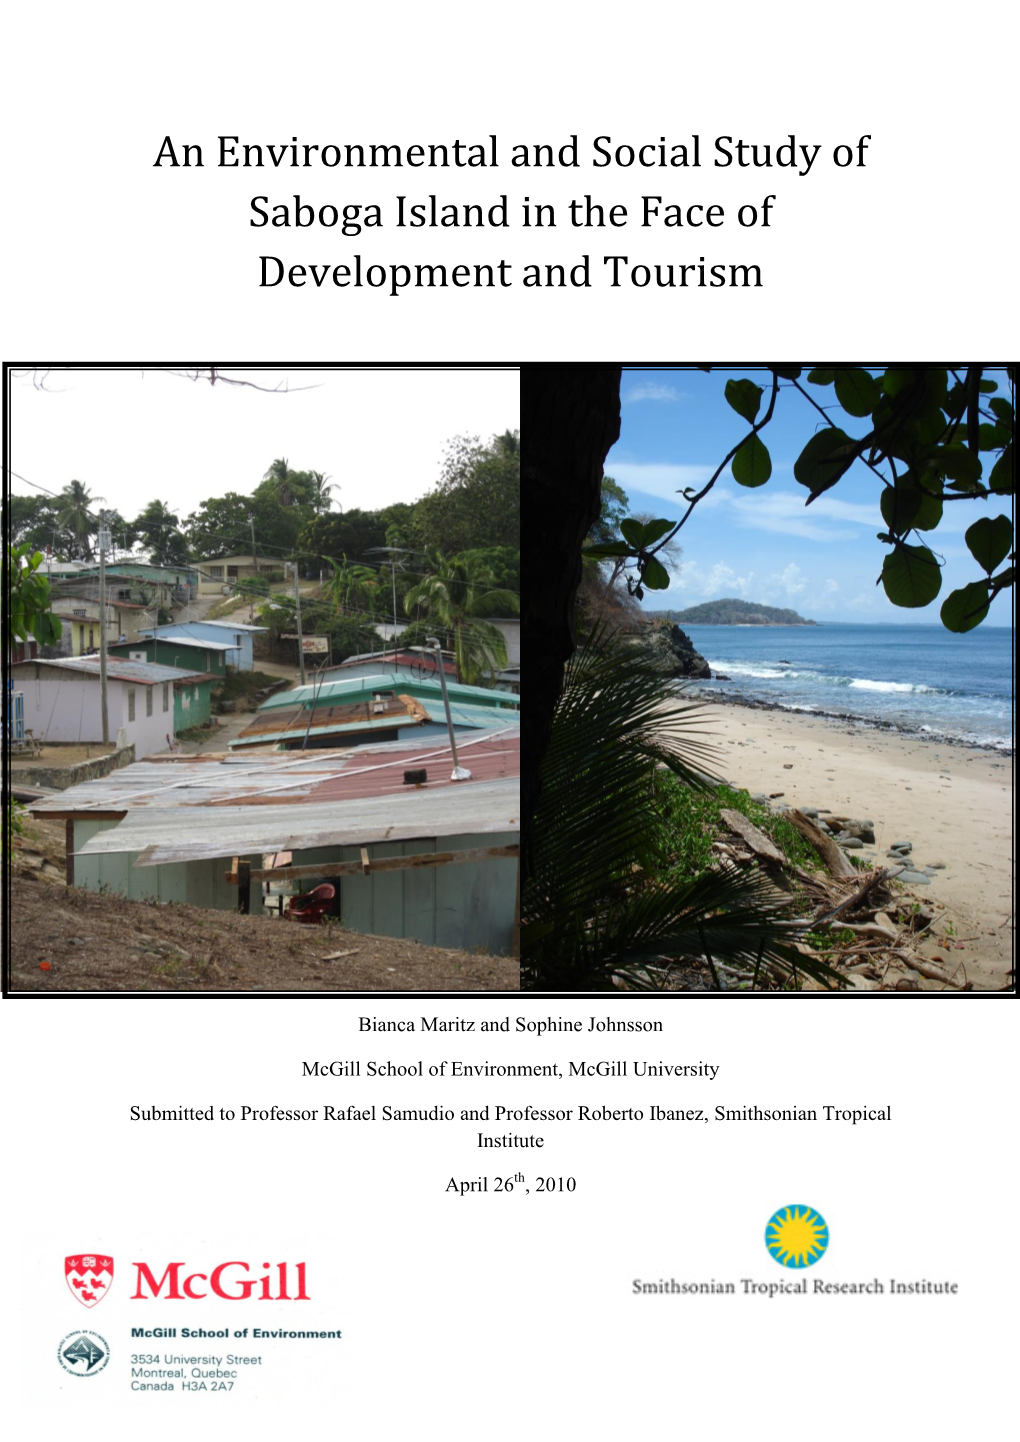 An Environmental and Social Study of Saboga Island in the Face of Development and Tourism